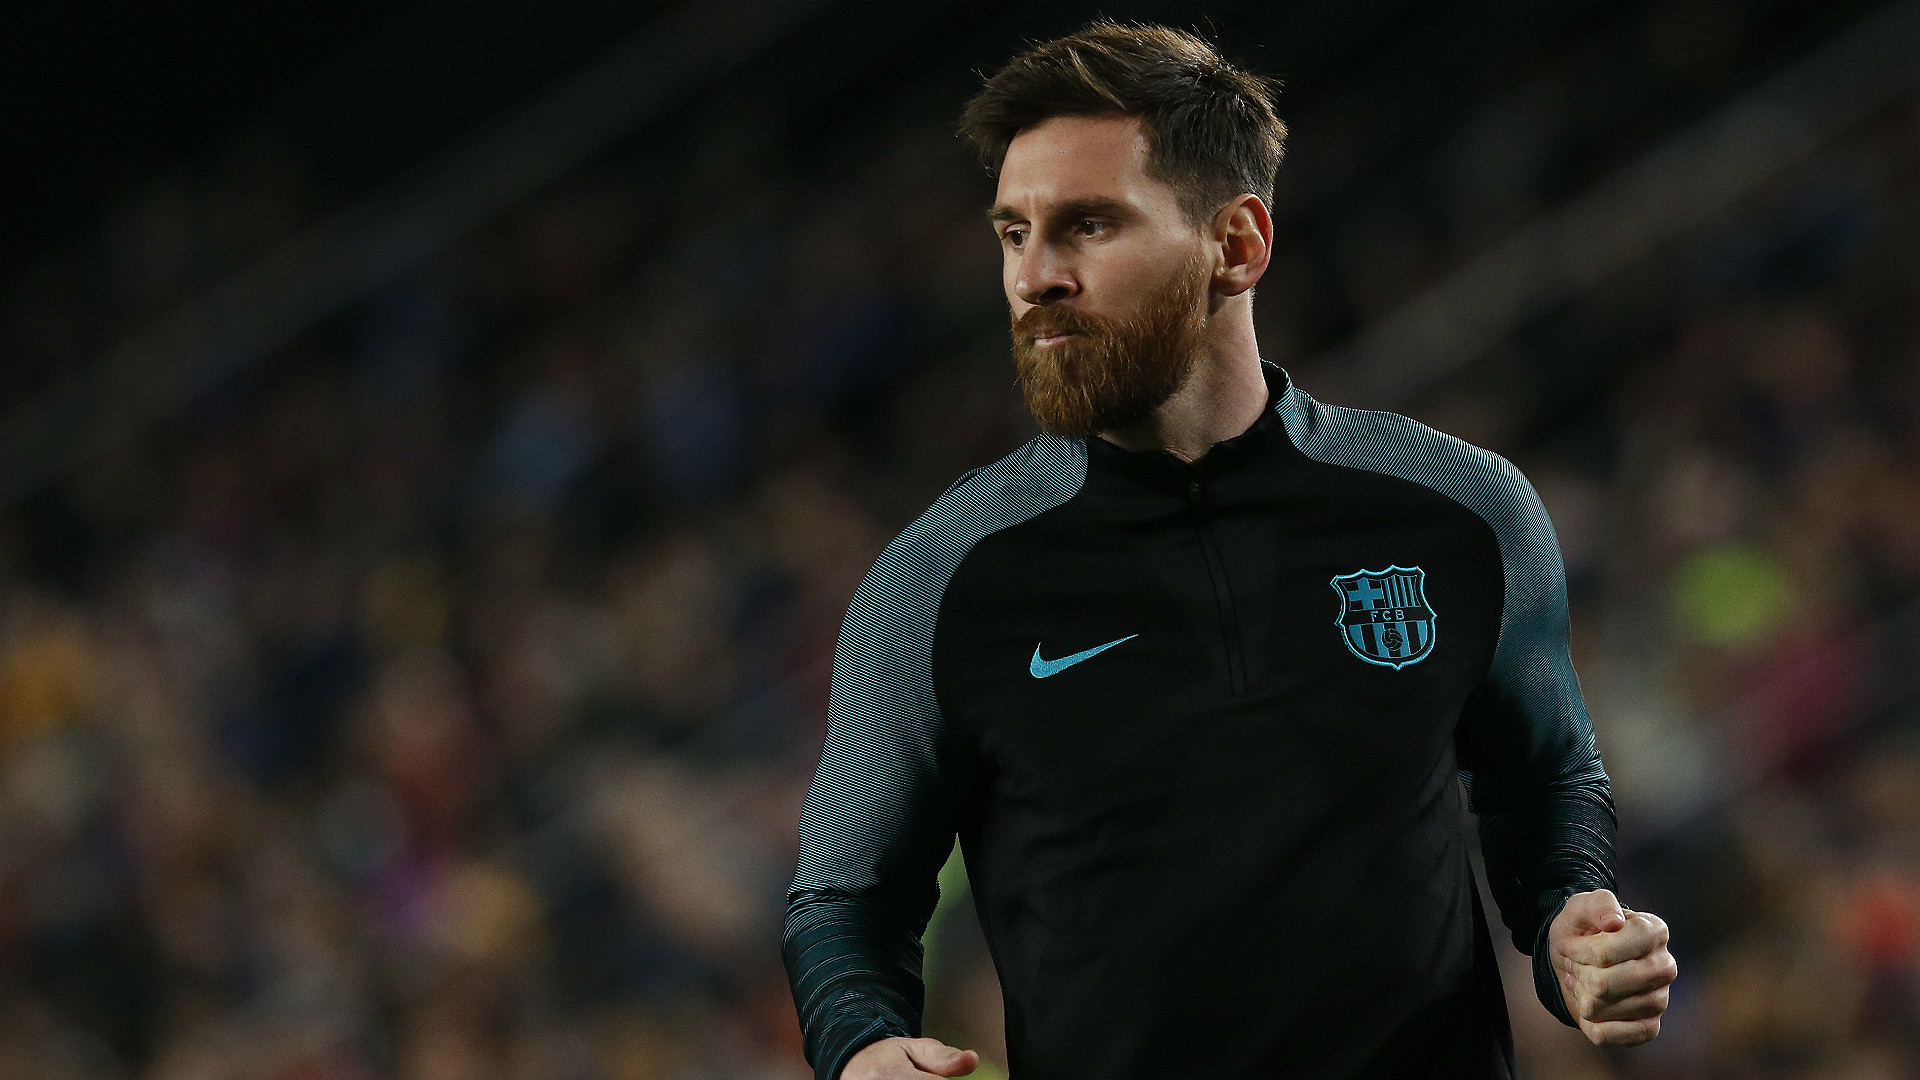 Lionel Messi 2018 Wallpapers (80+ images)